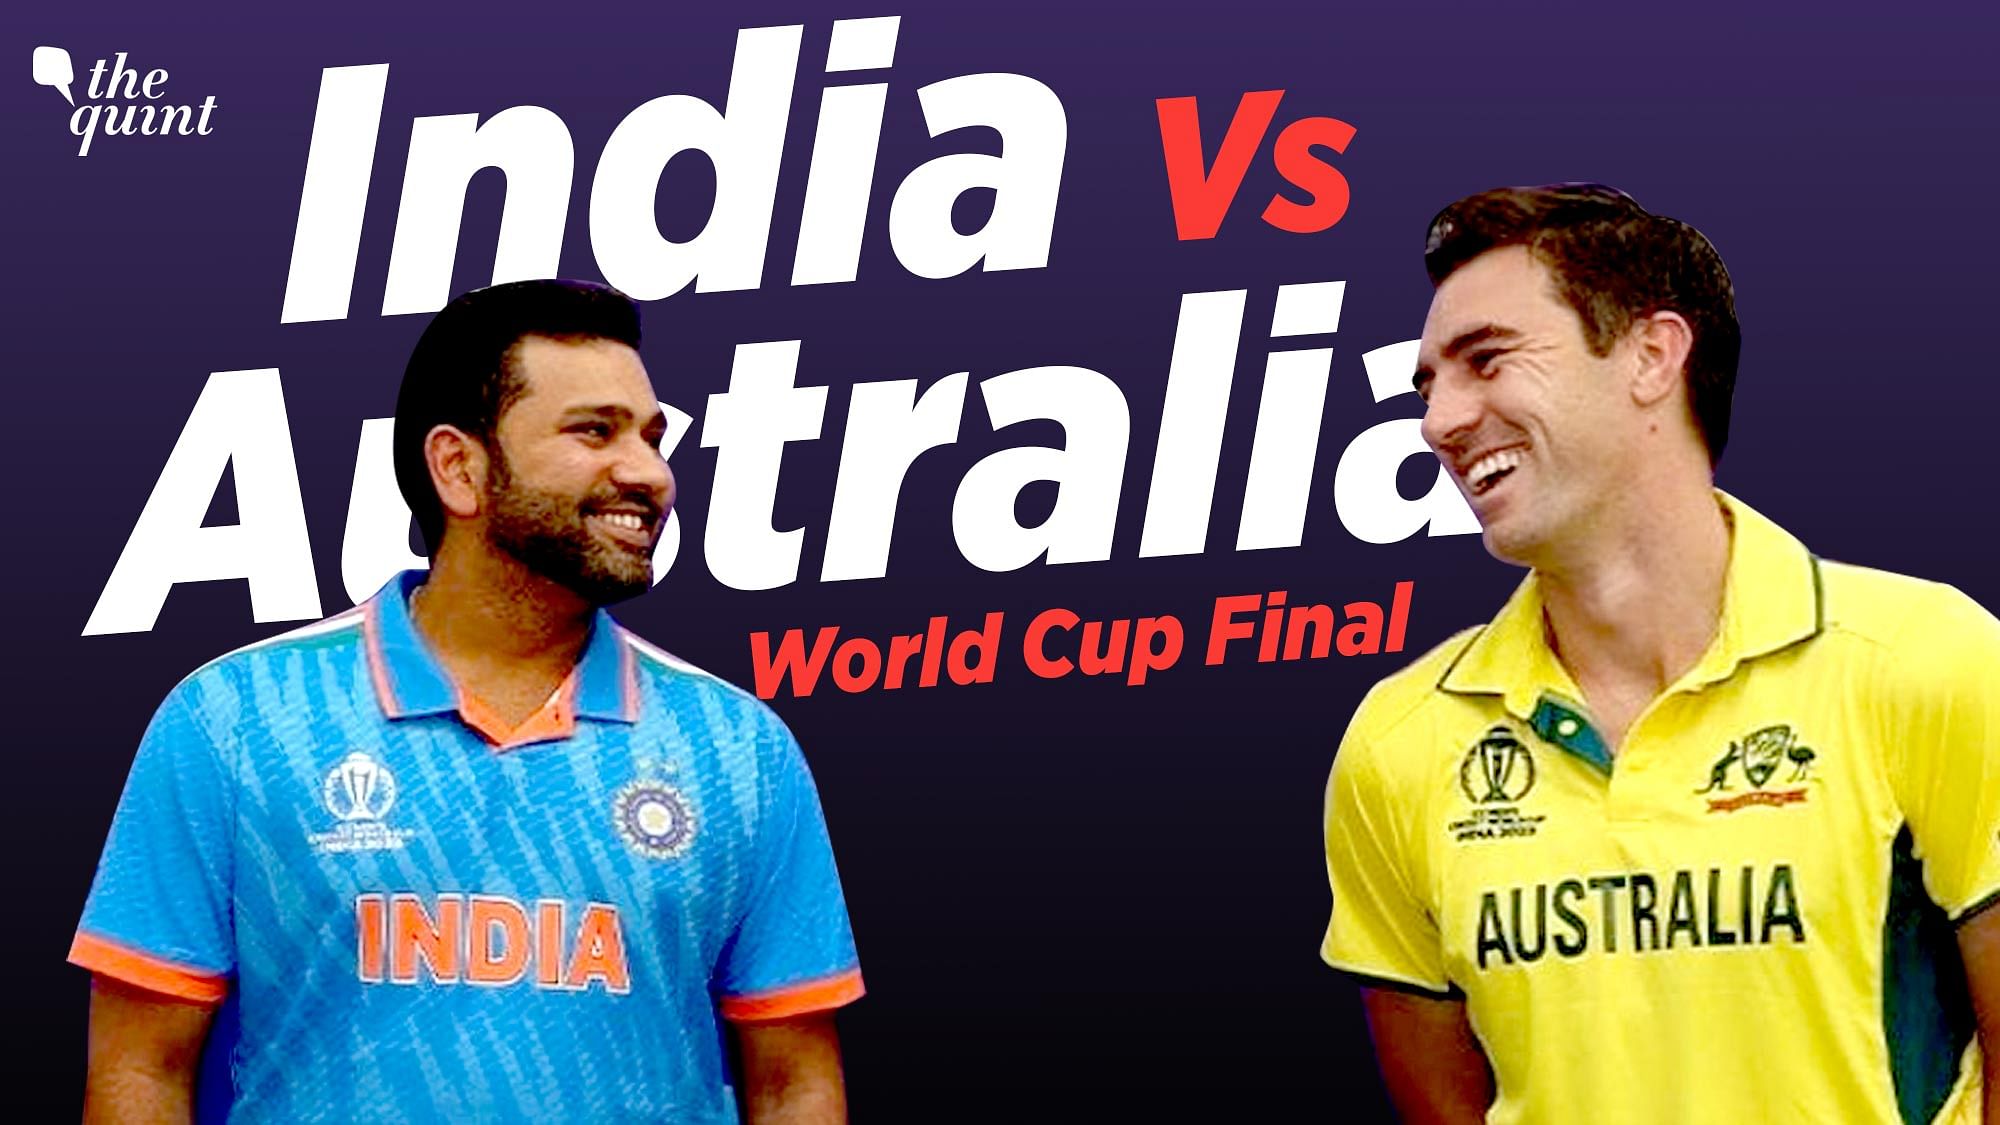 India vs Australia Final How To Watch IND vs AUS Live Streaming World